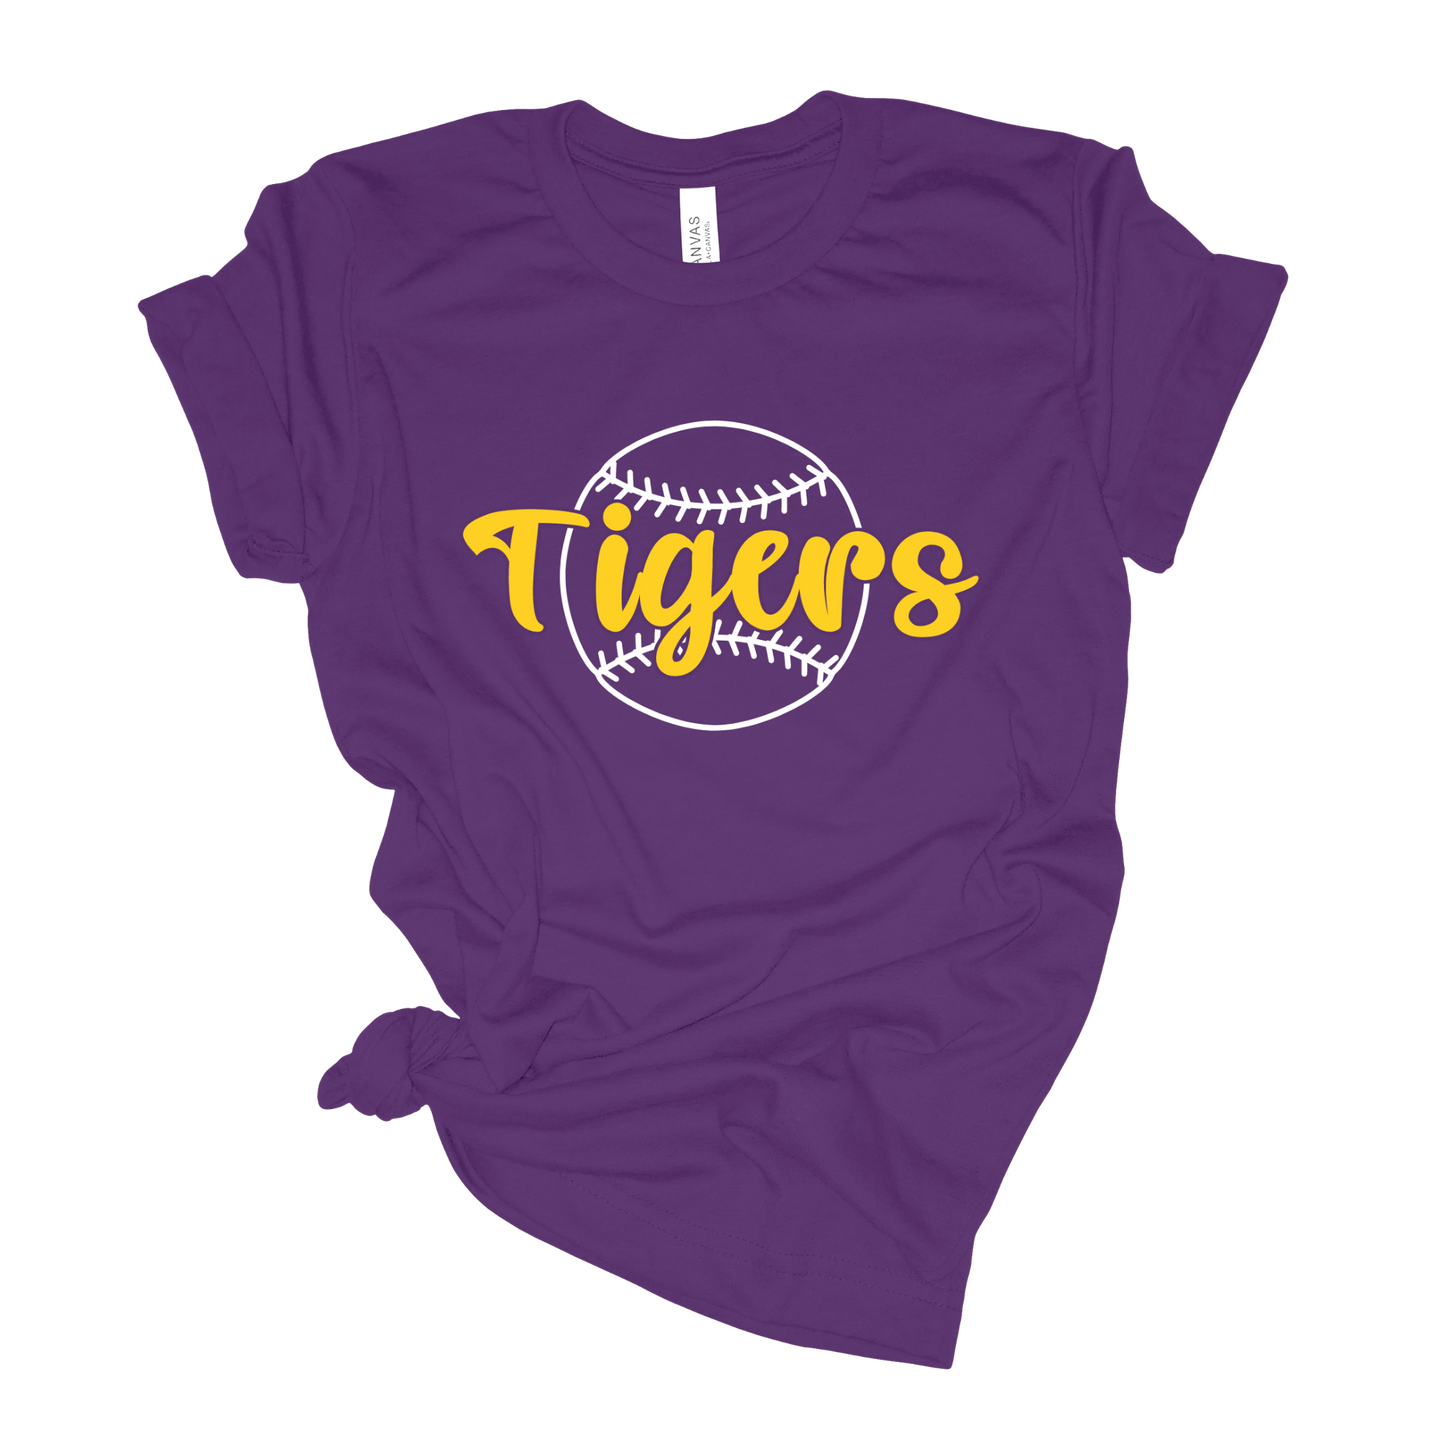 LSU Tigers Baseball T-shirt, Bella Canvas Royal Purple Shirt with Yellow Wording and White Outline of a Baseball